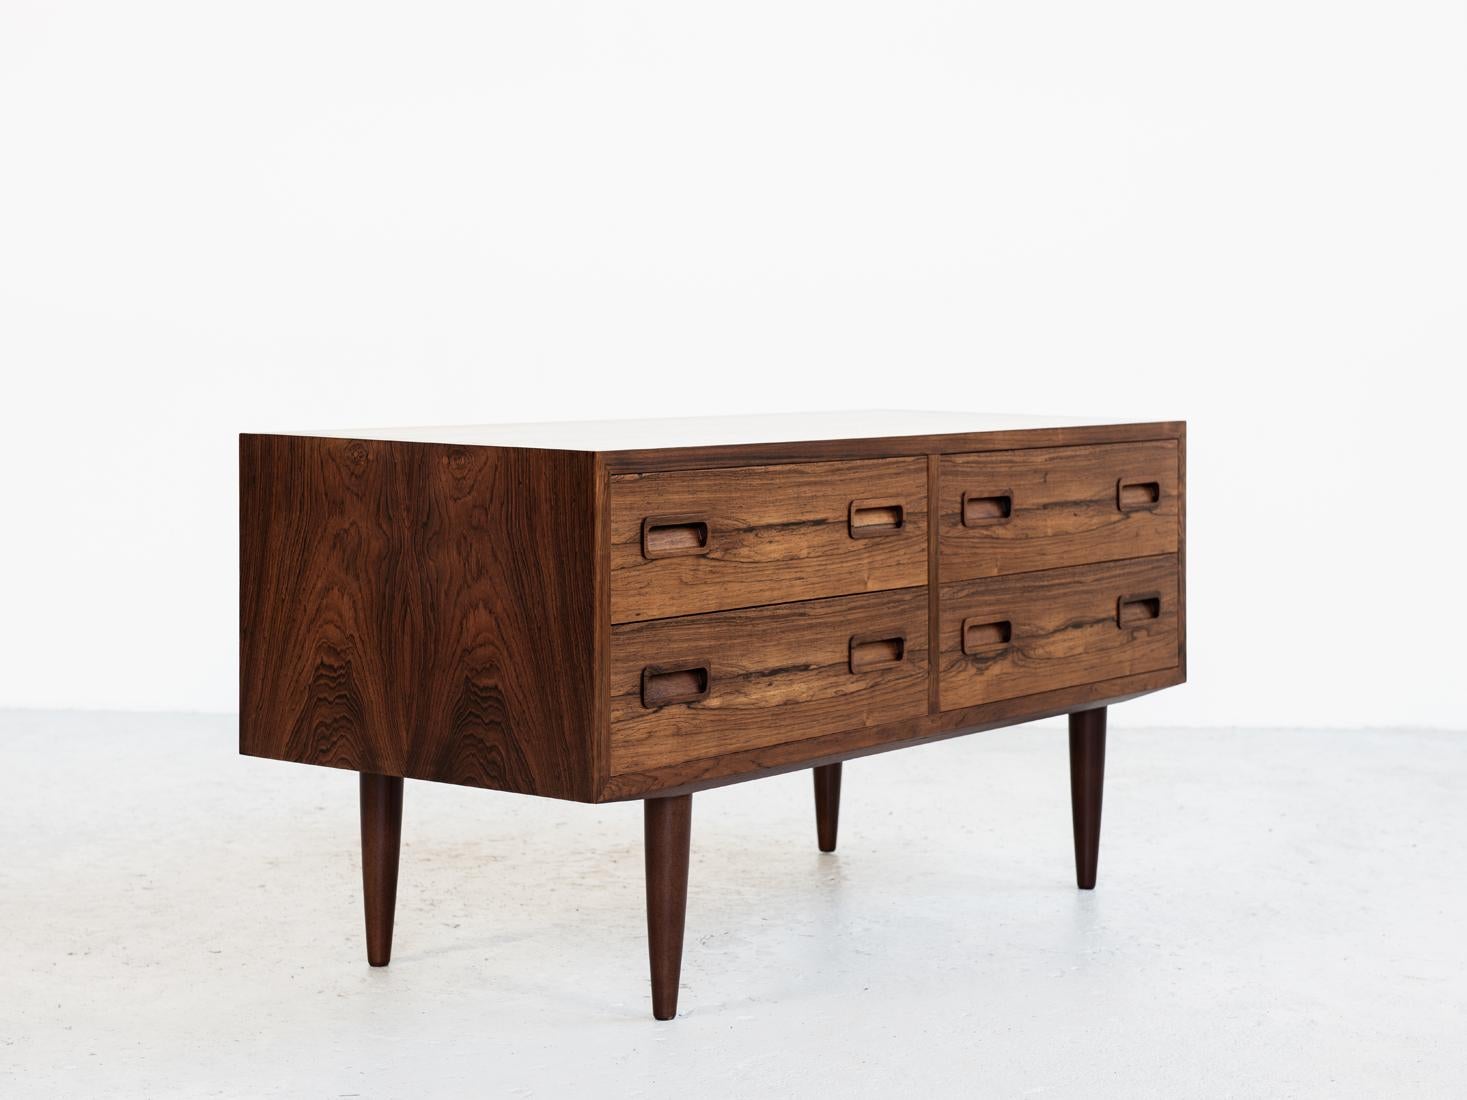 This midcentury Danish chest of 2x2 drawers in rosewood was manufactured by Hundevad in Denmark in the 1960s. It has beautiful drawings in the wood and has the typical shape of drawer handles. It is a proof of good quality manufacturing. This chest